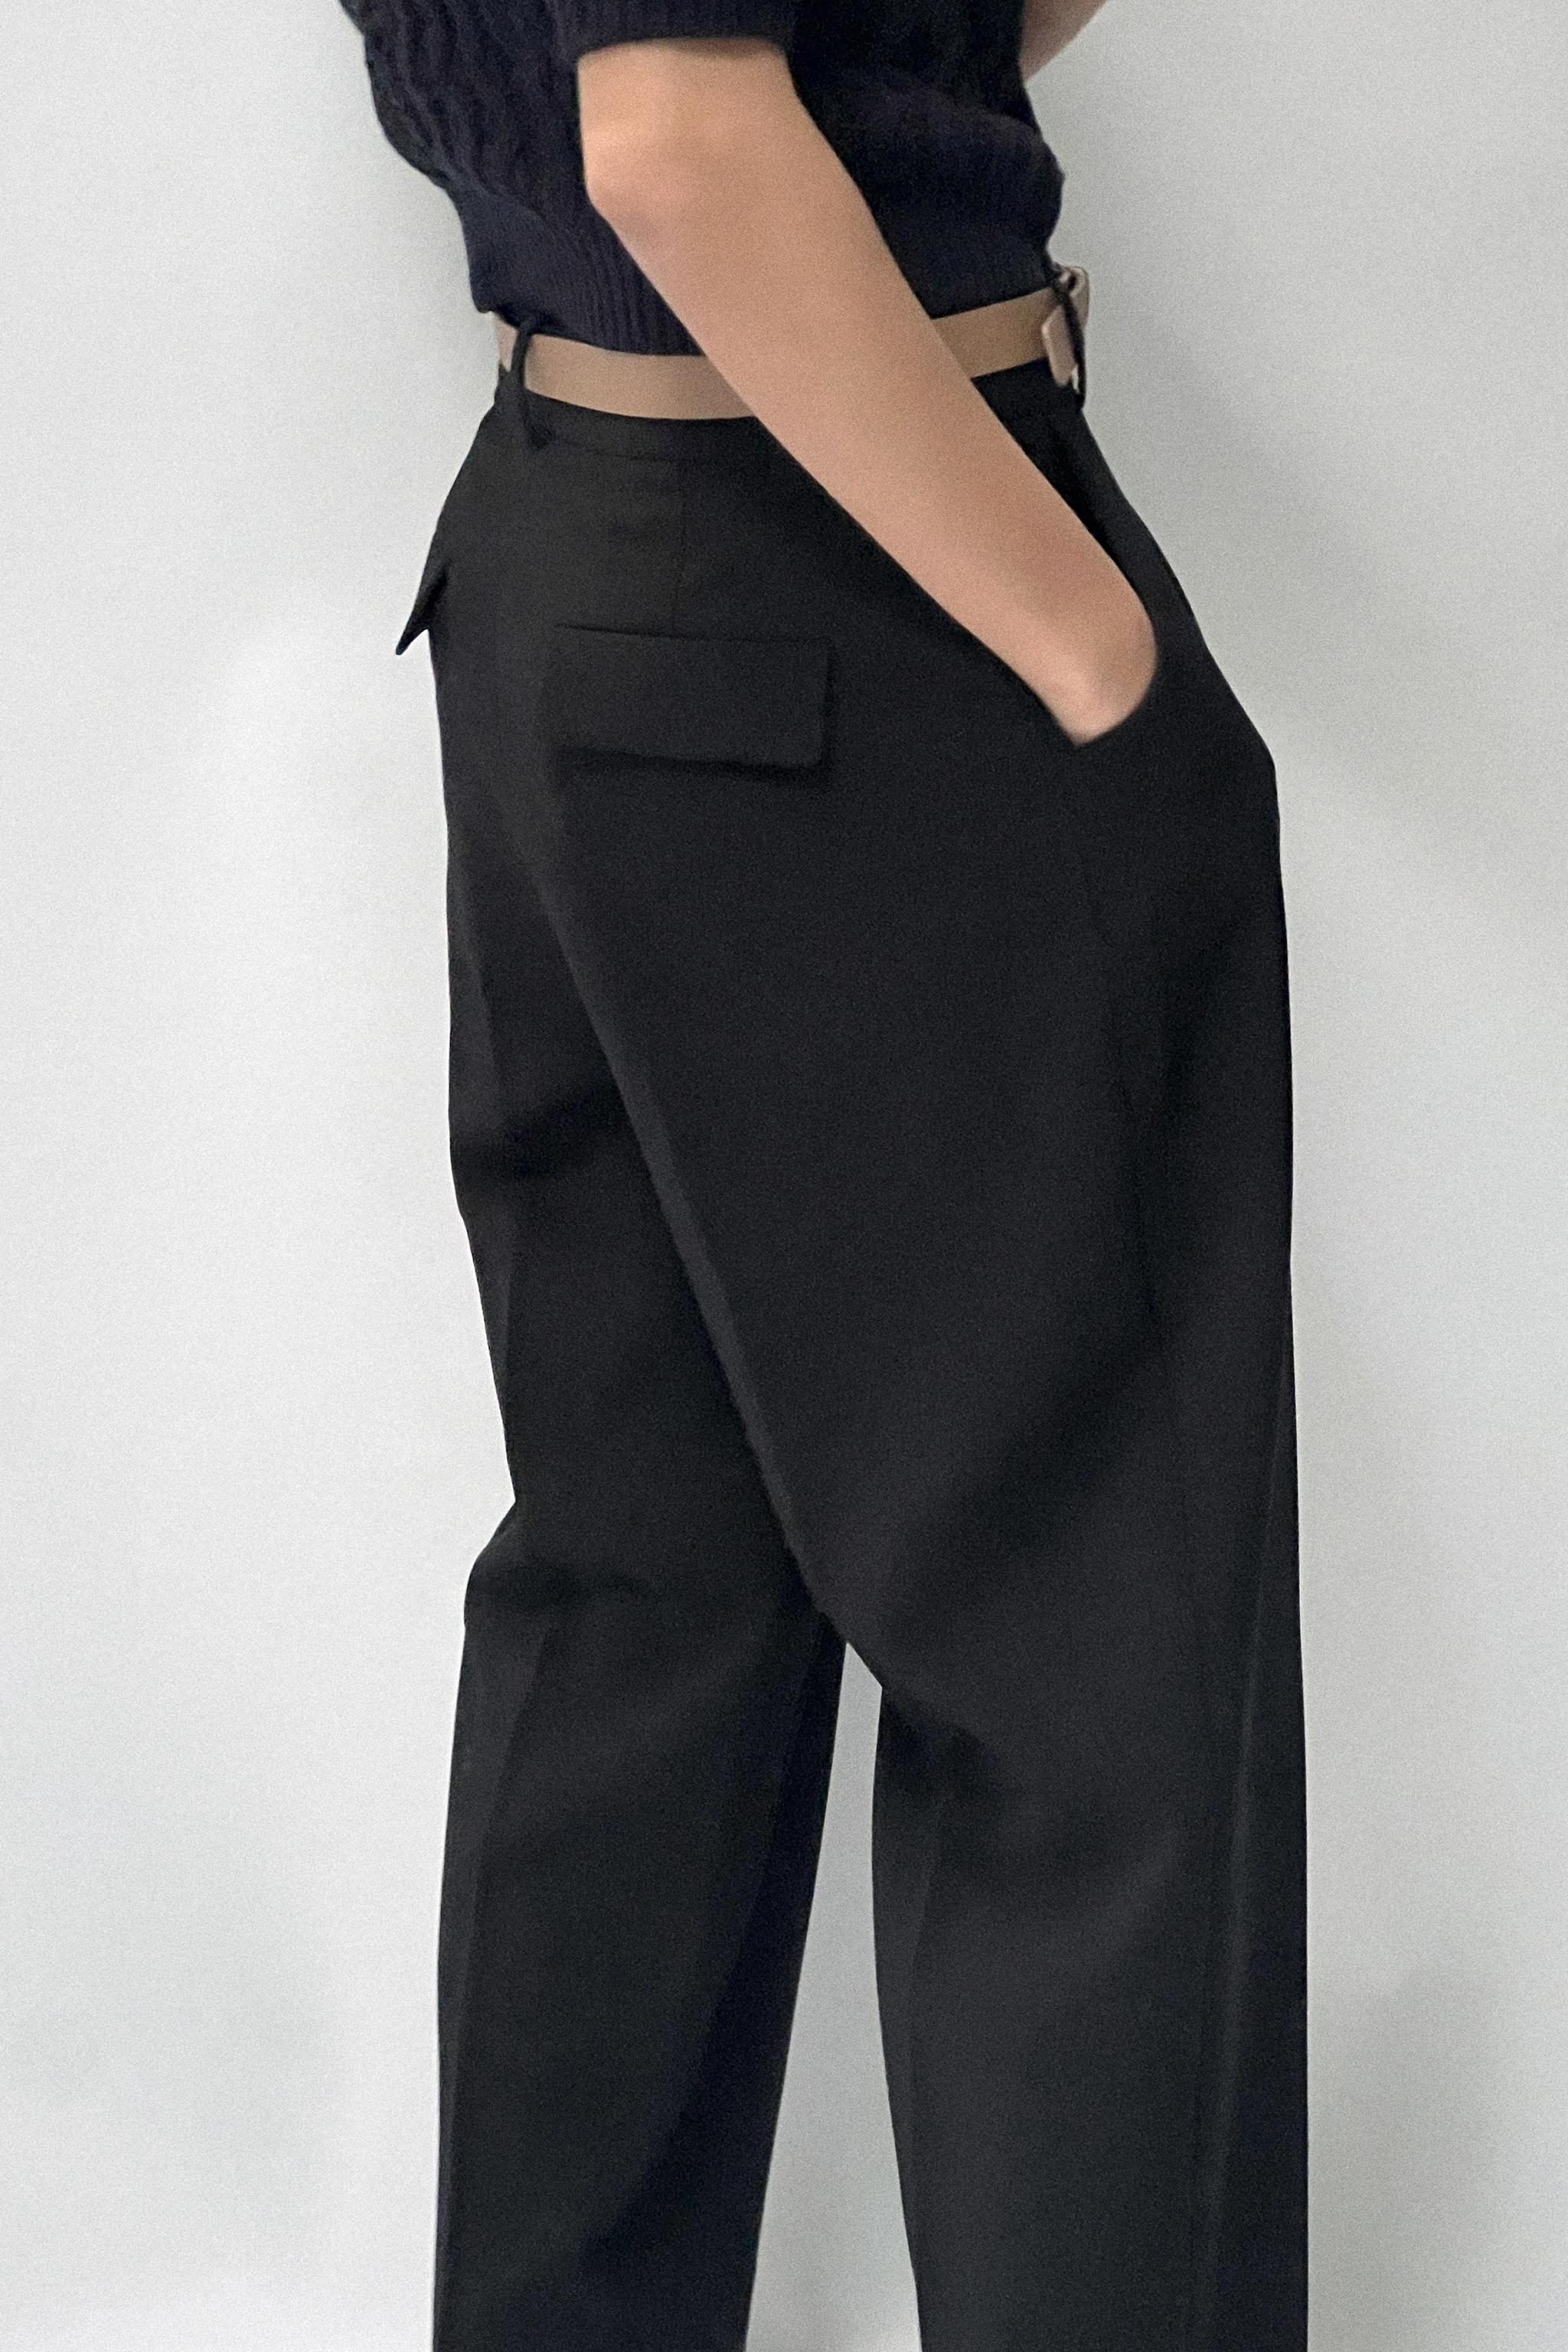 Zara BELTED TAPERED PANTS